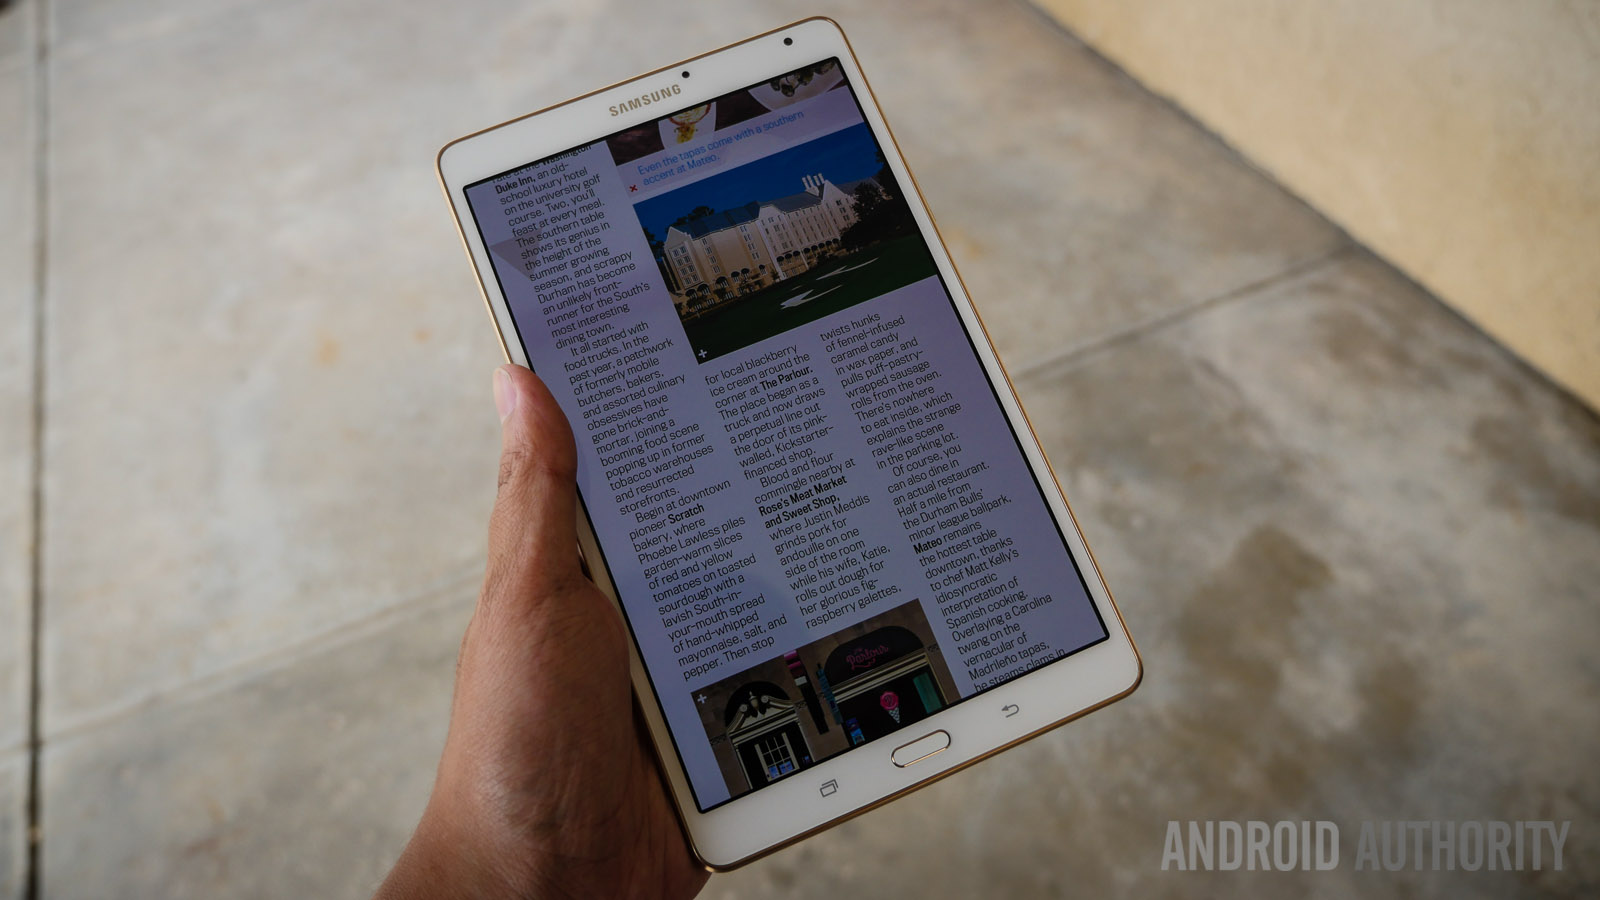 samsung galaxy tab s 8.4 review (16 of 27)